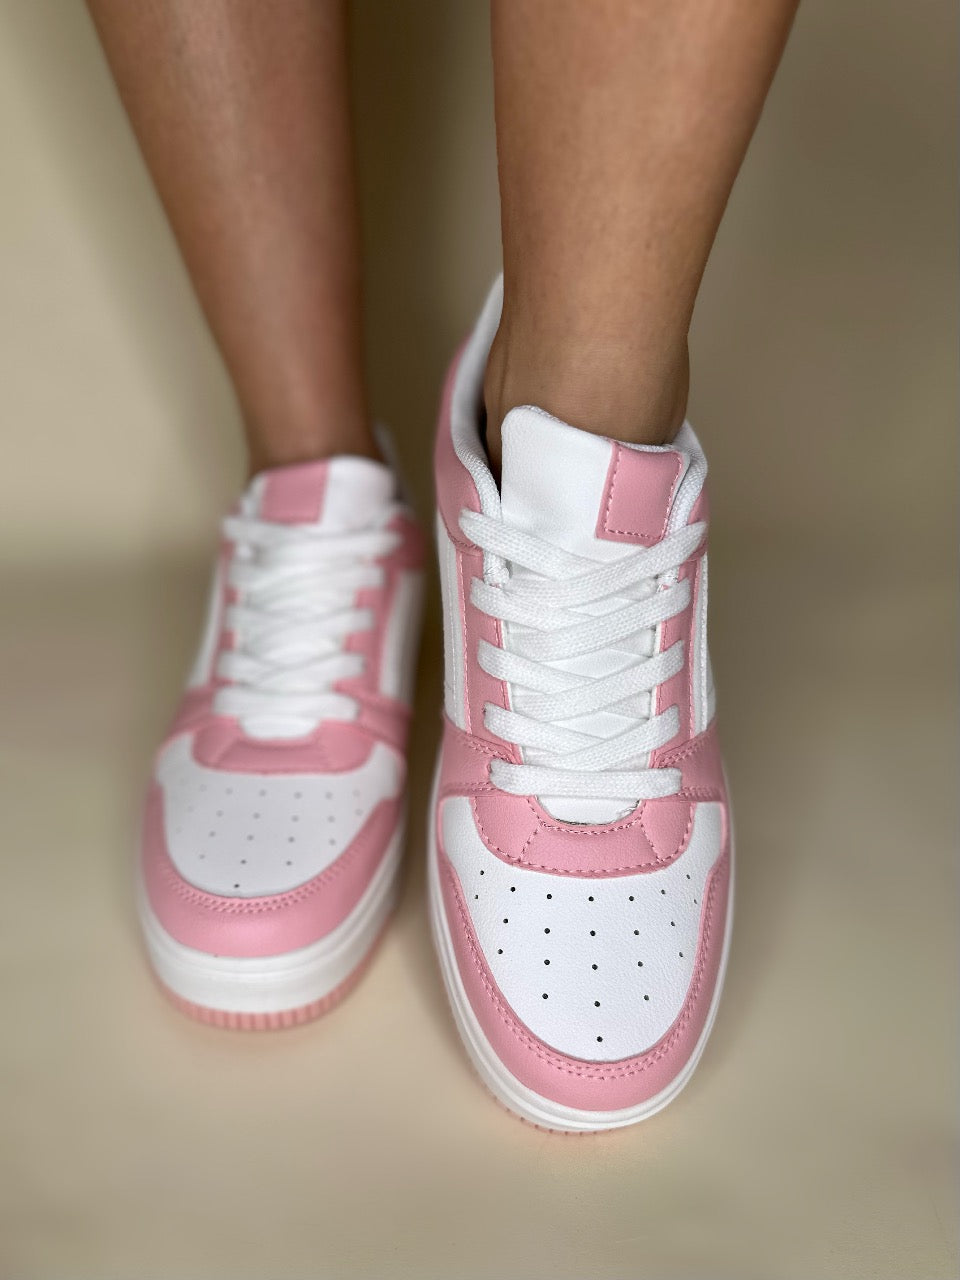 A FORCE PINK TENNIS SHOE